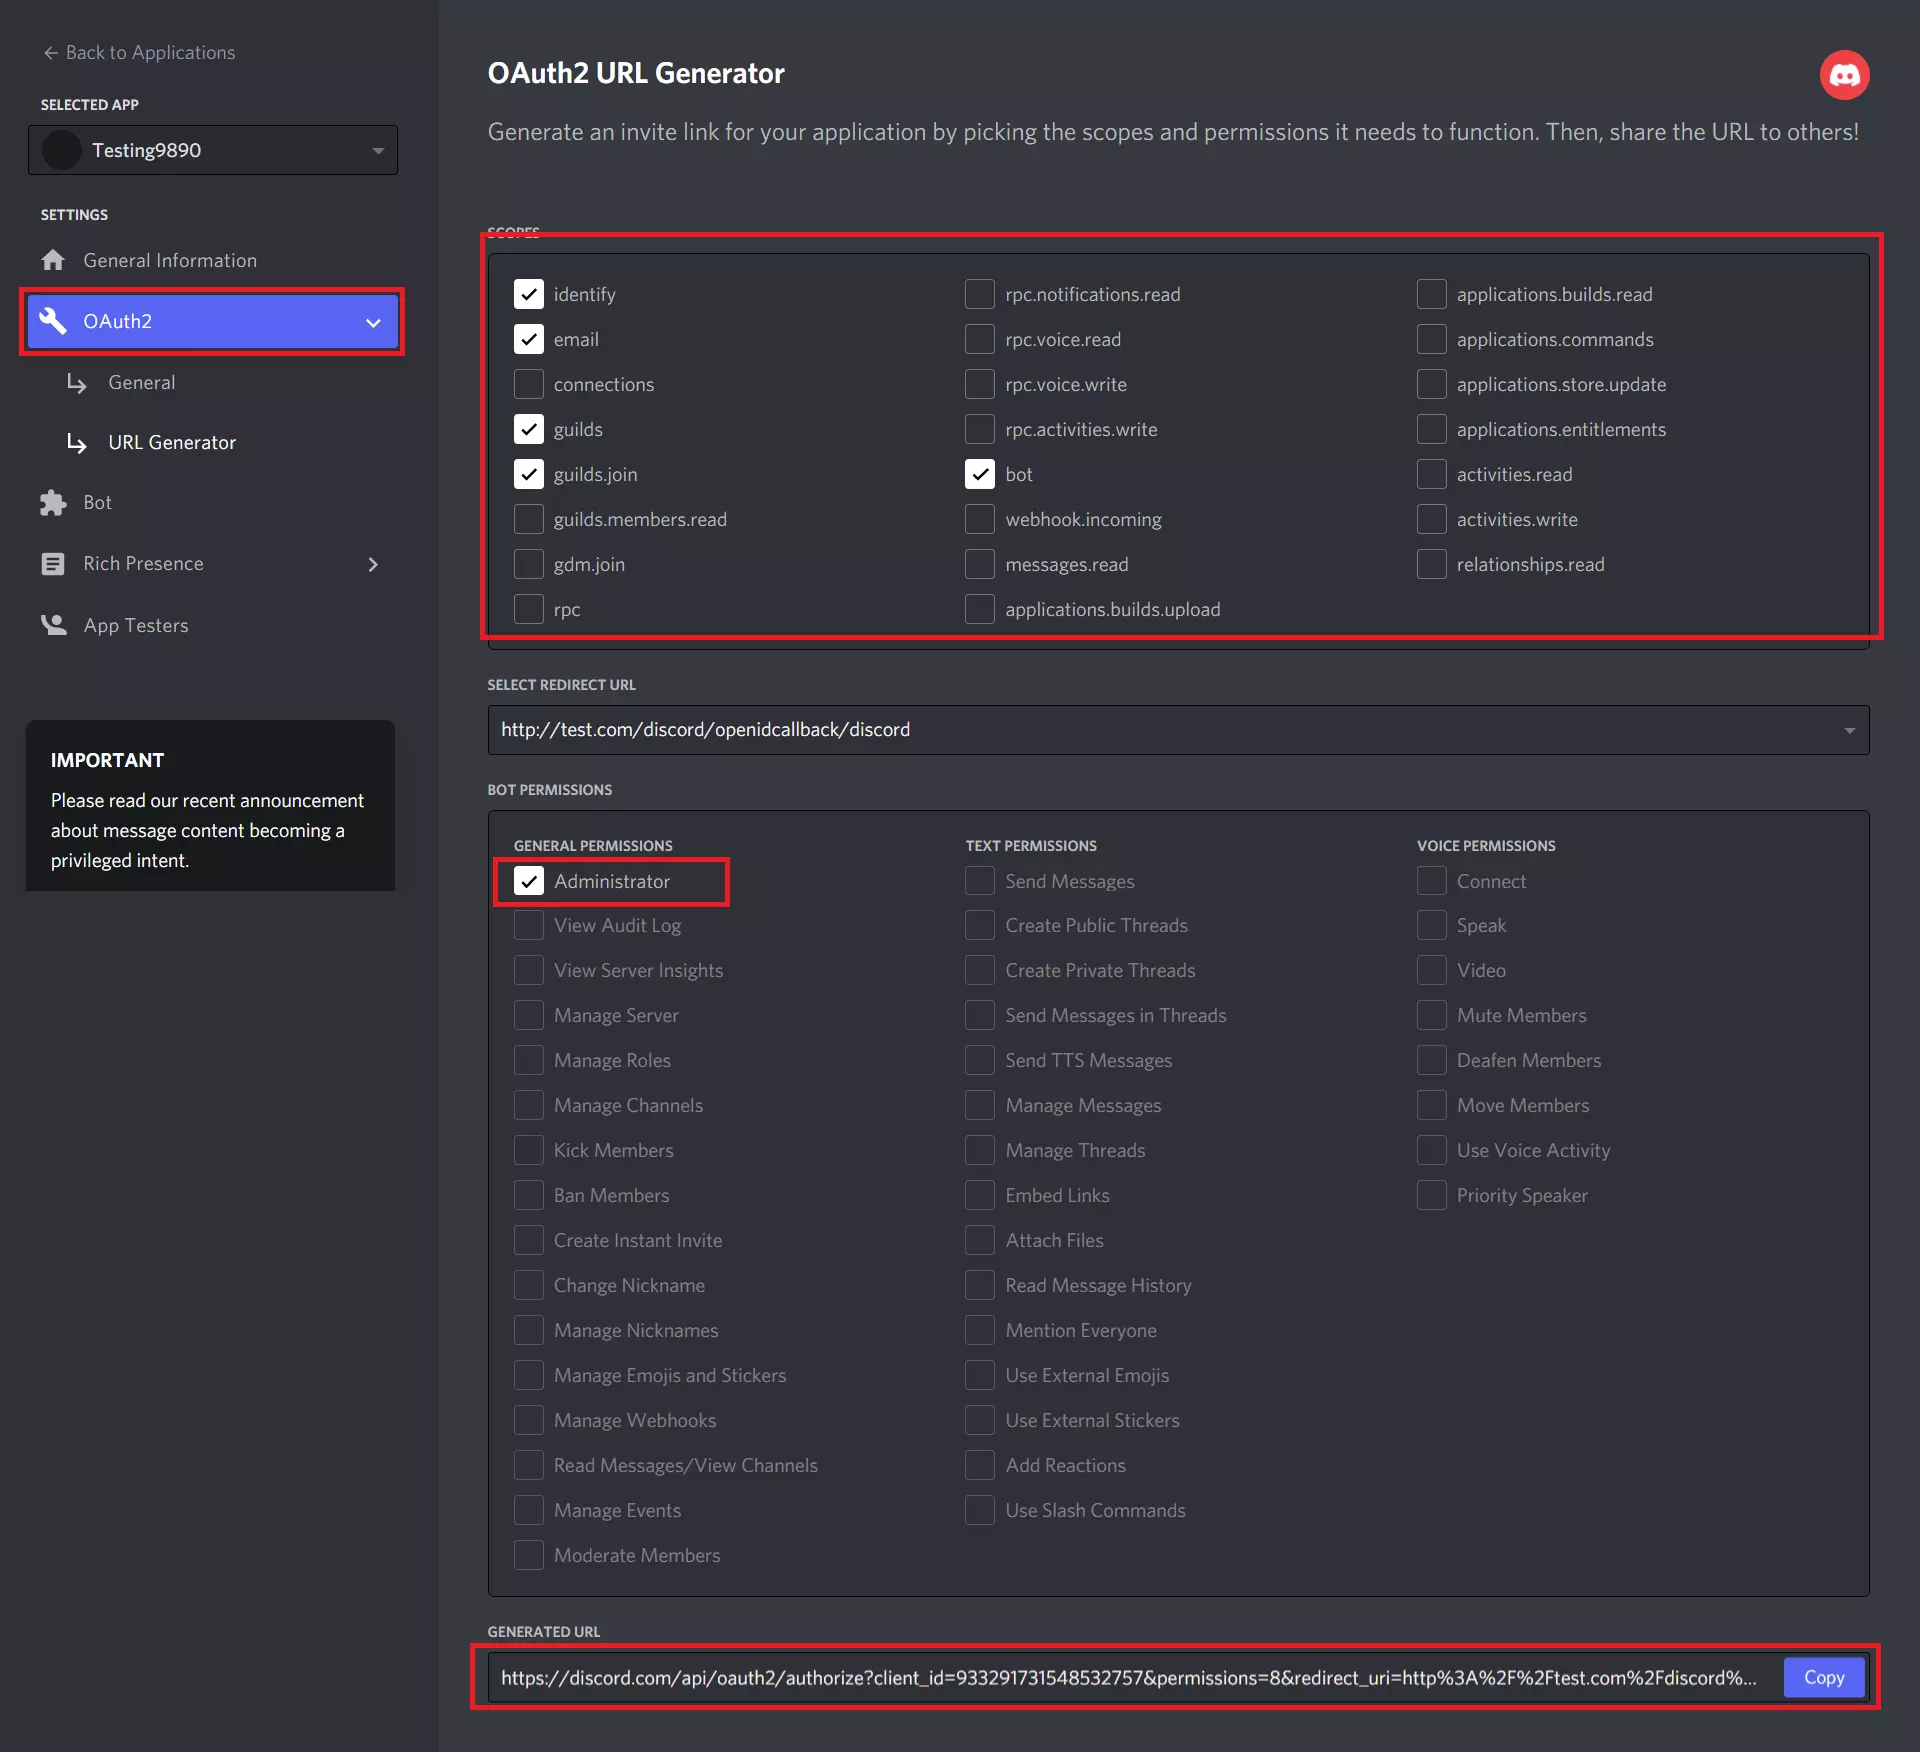 URL generator select permissions for memberpress to discord role mapping